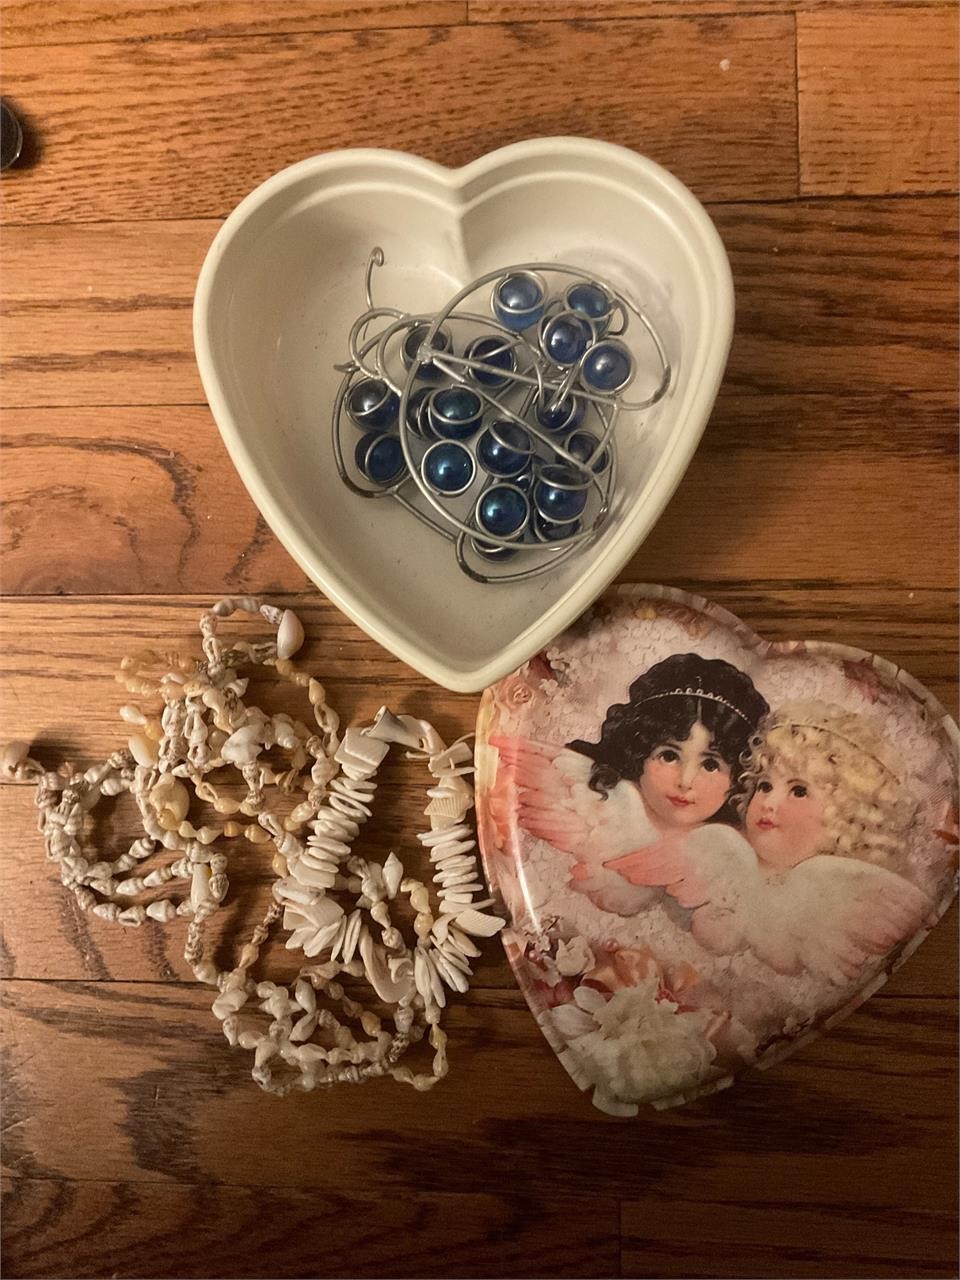 Vintage jewelry and heart box made in USA